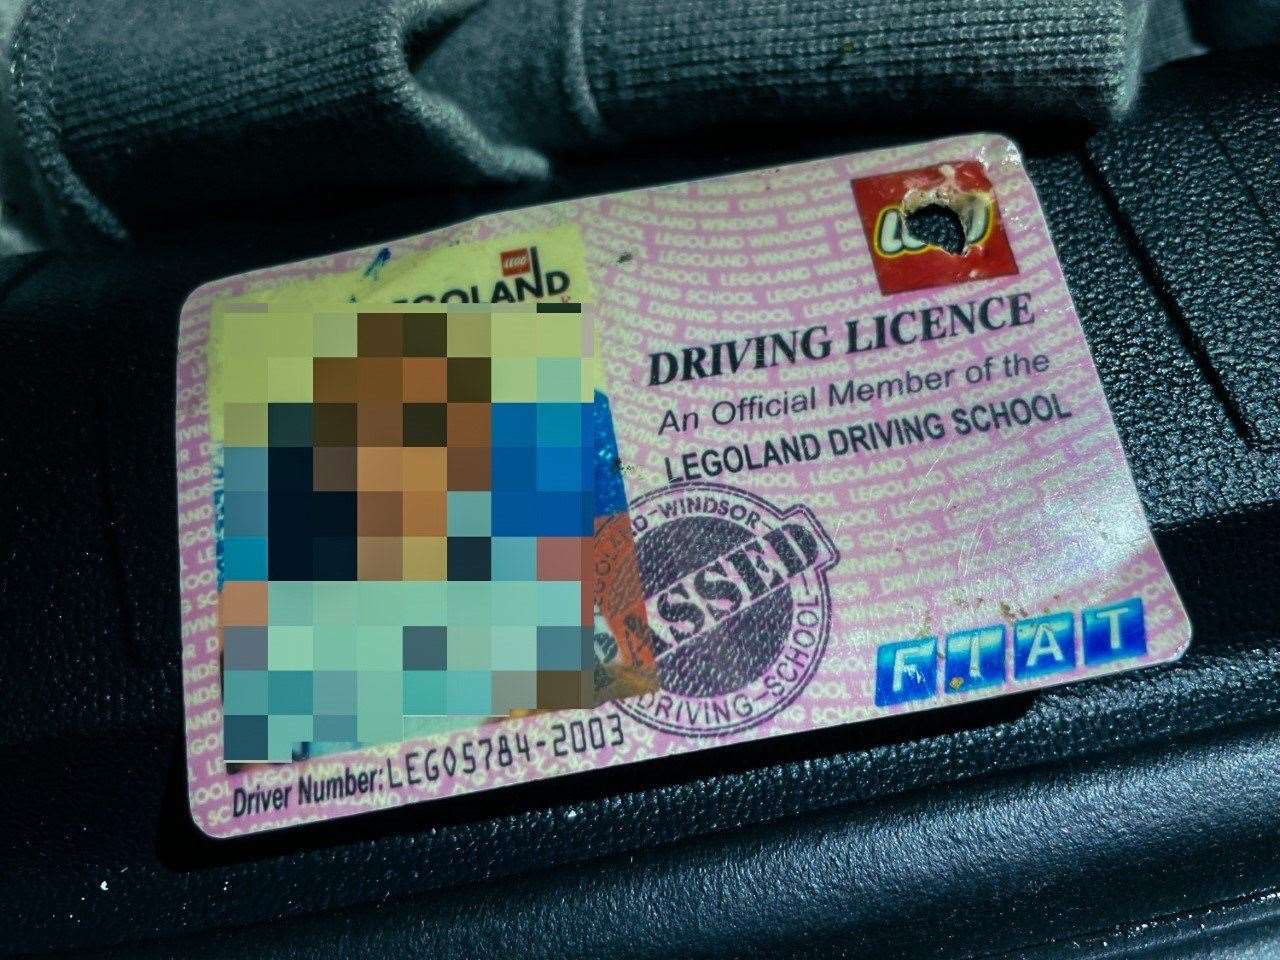 The Legoland licence Picture: Kent Police RPU